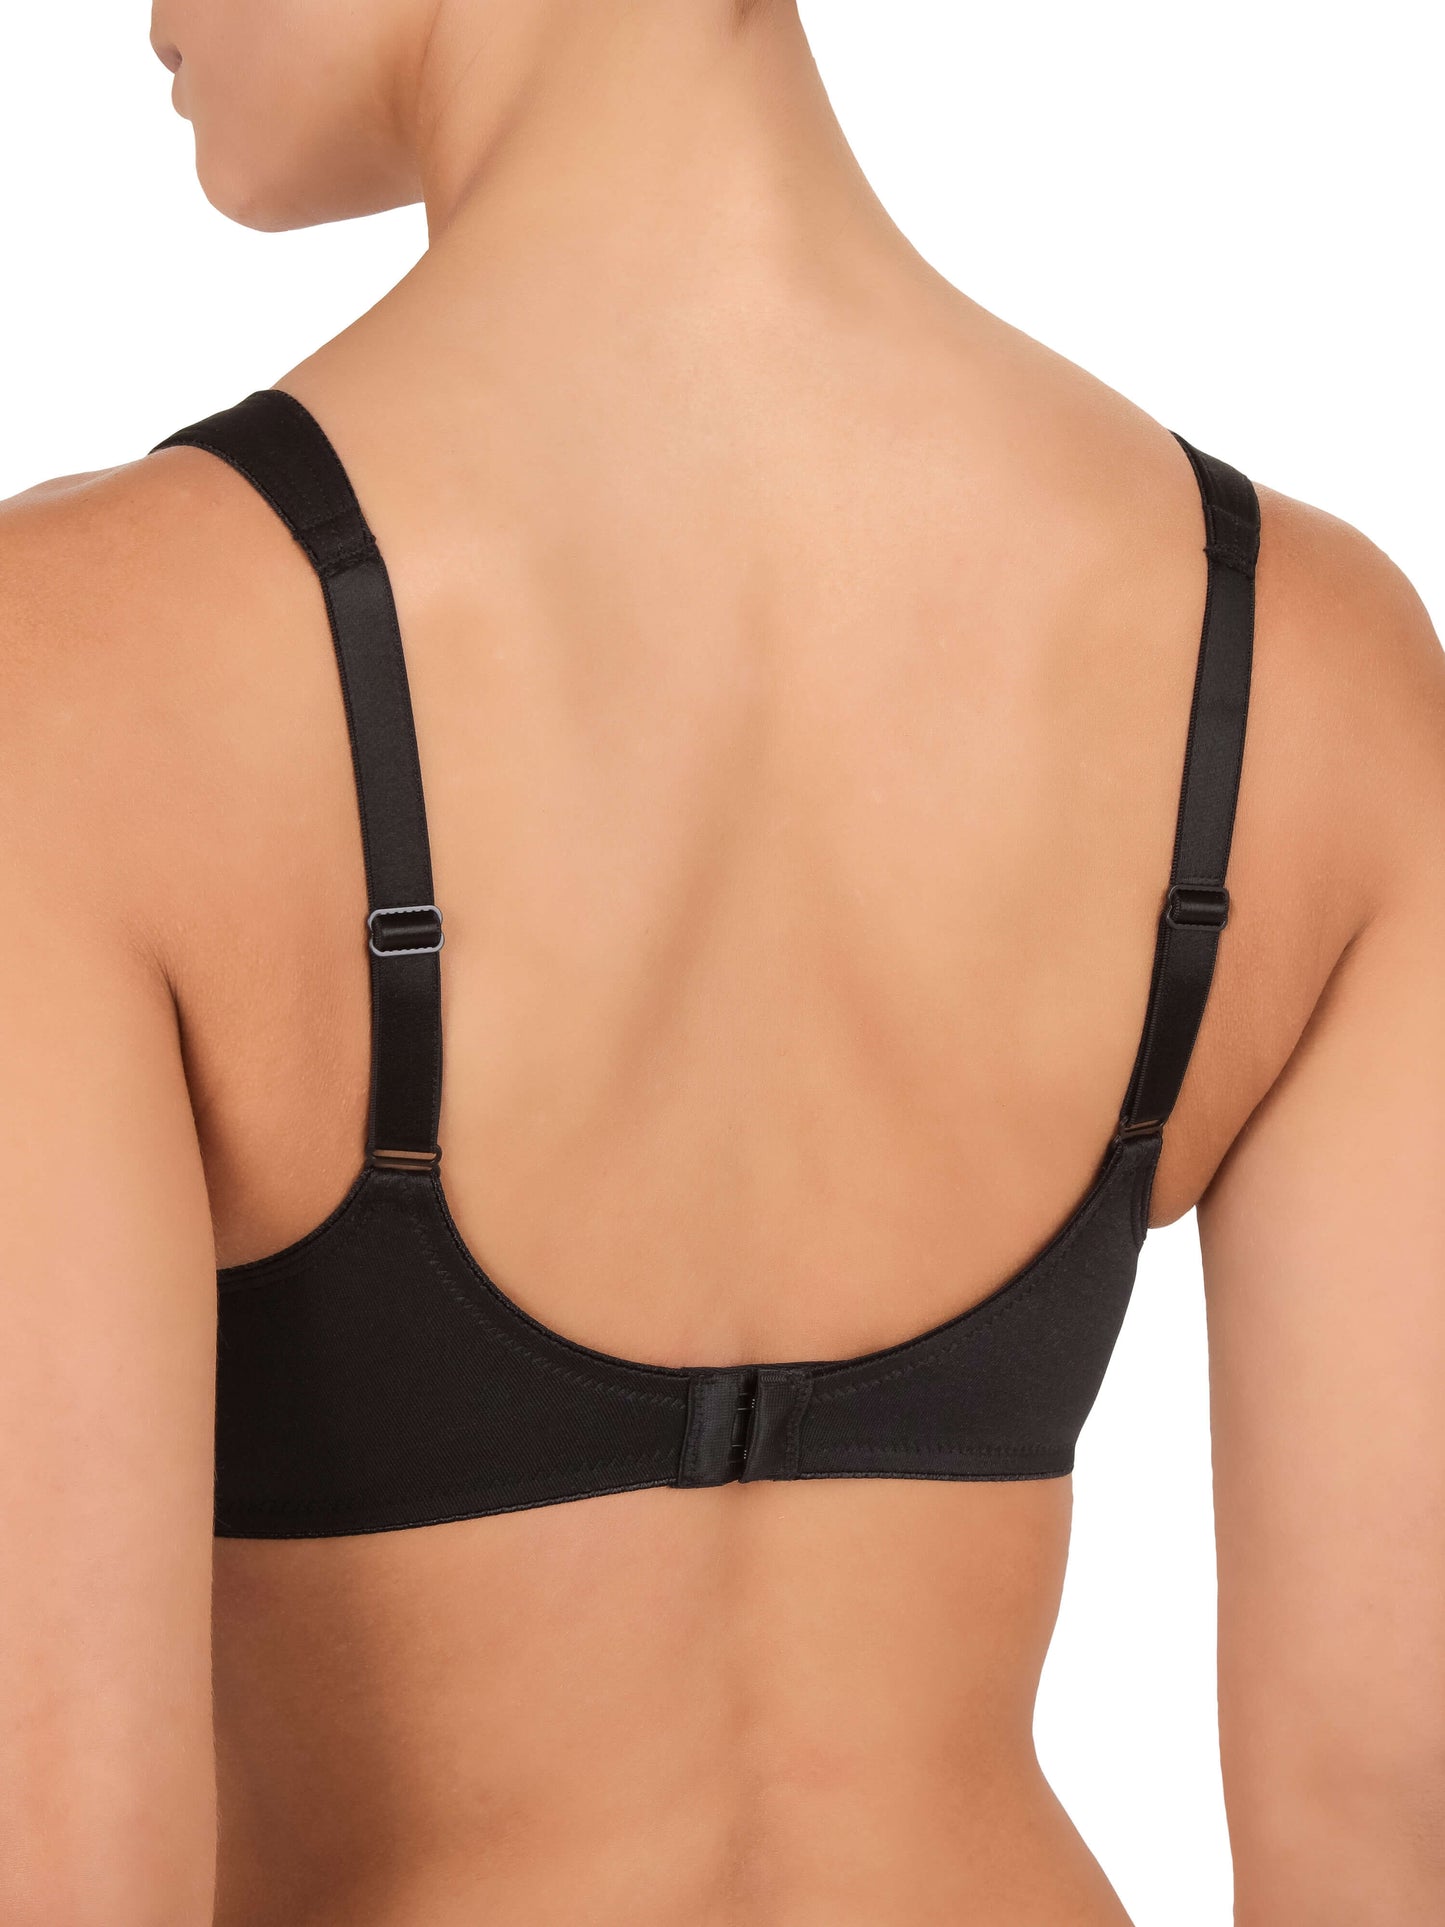 Pure Balance Underwire Spacer Bra - Black worn by model back view